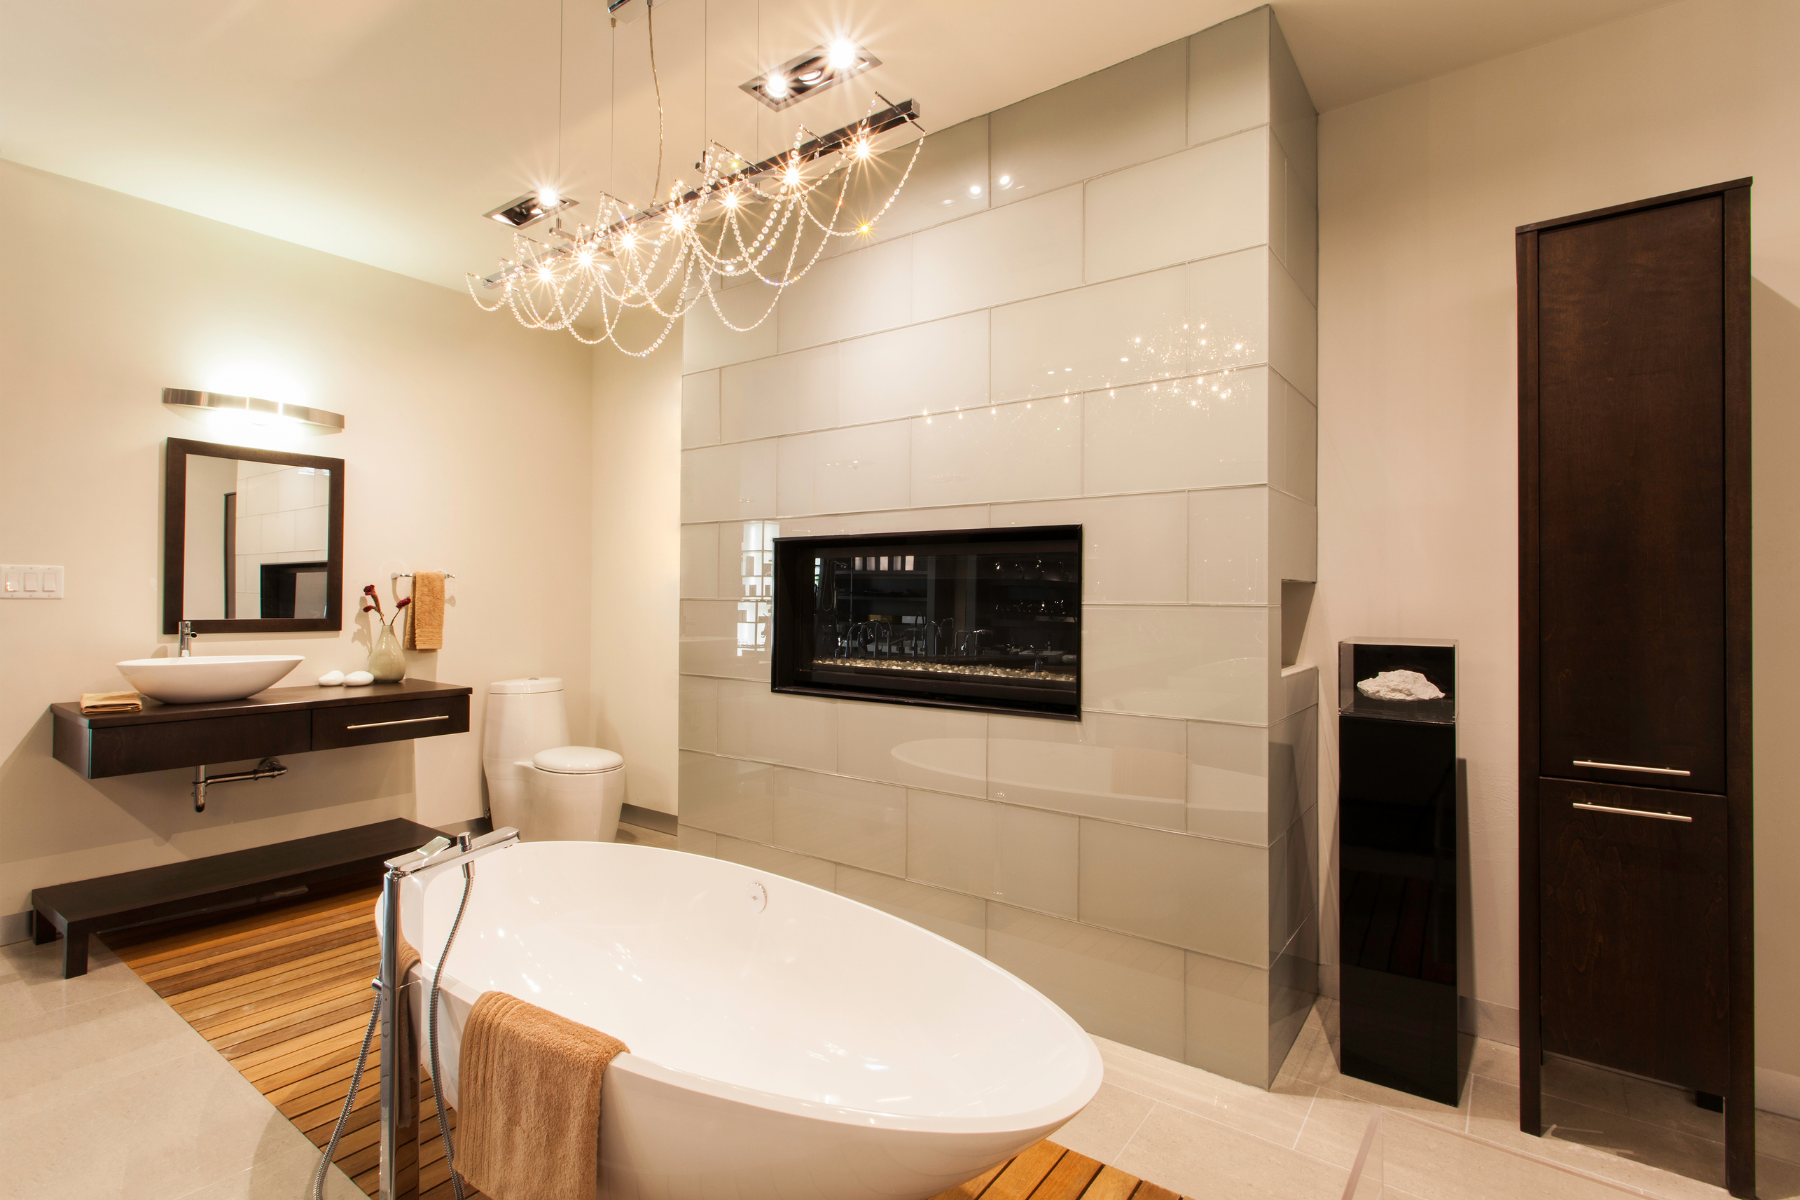 Bathroom with soaker tub and fireplace